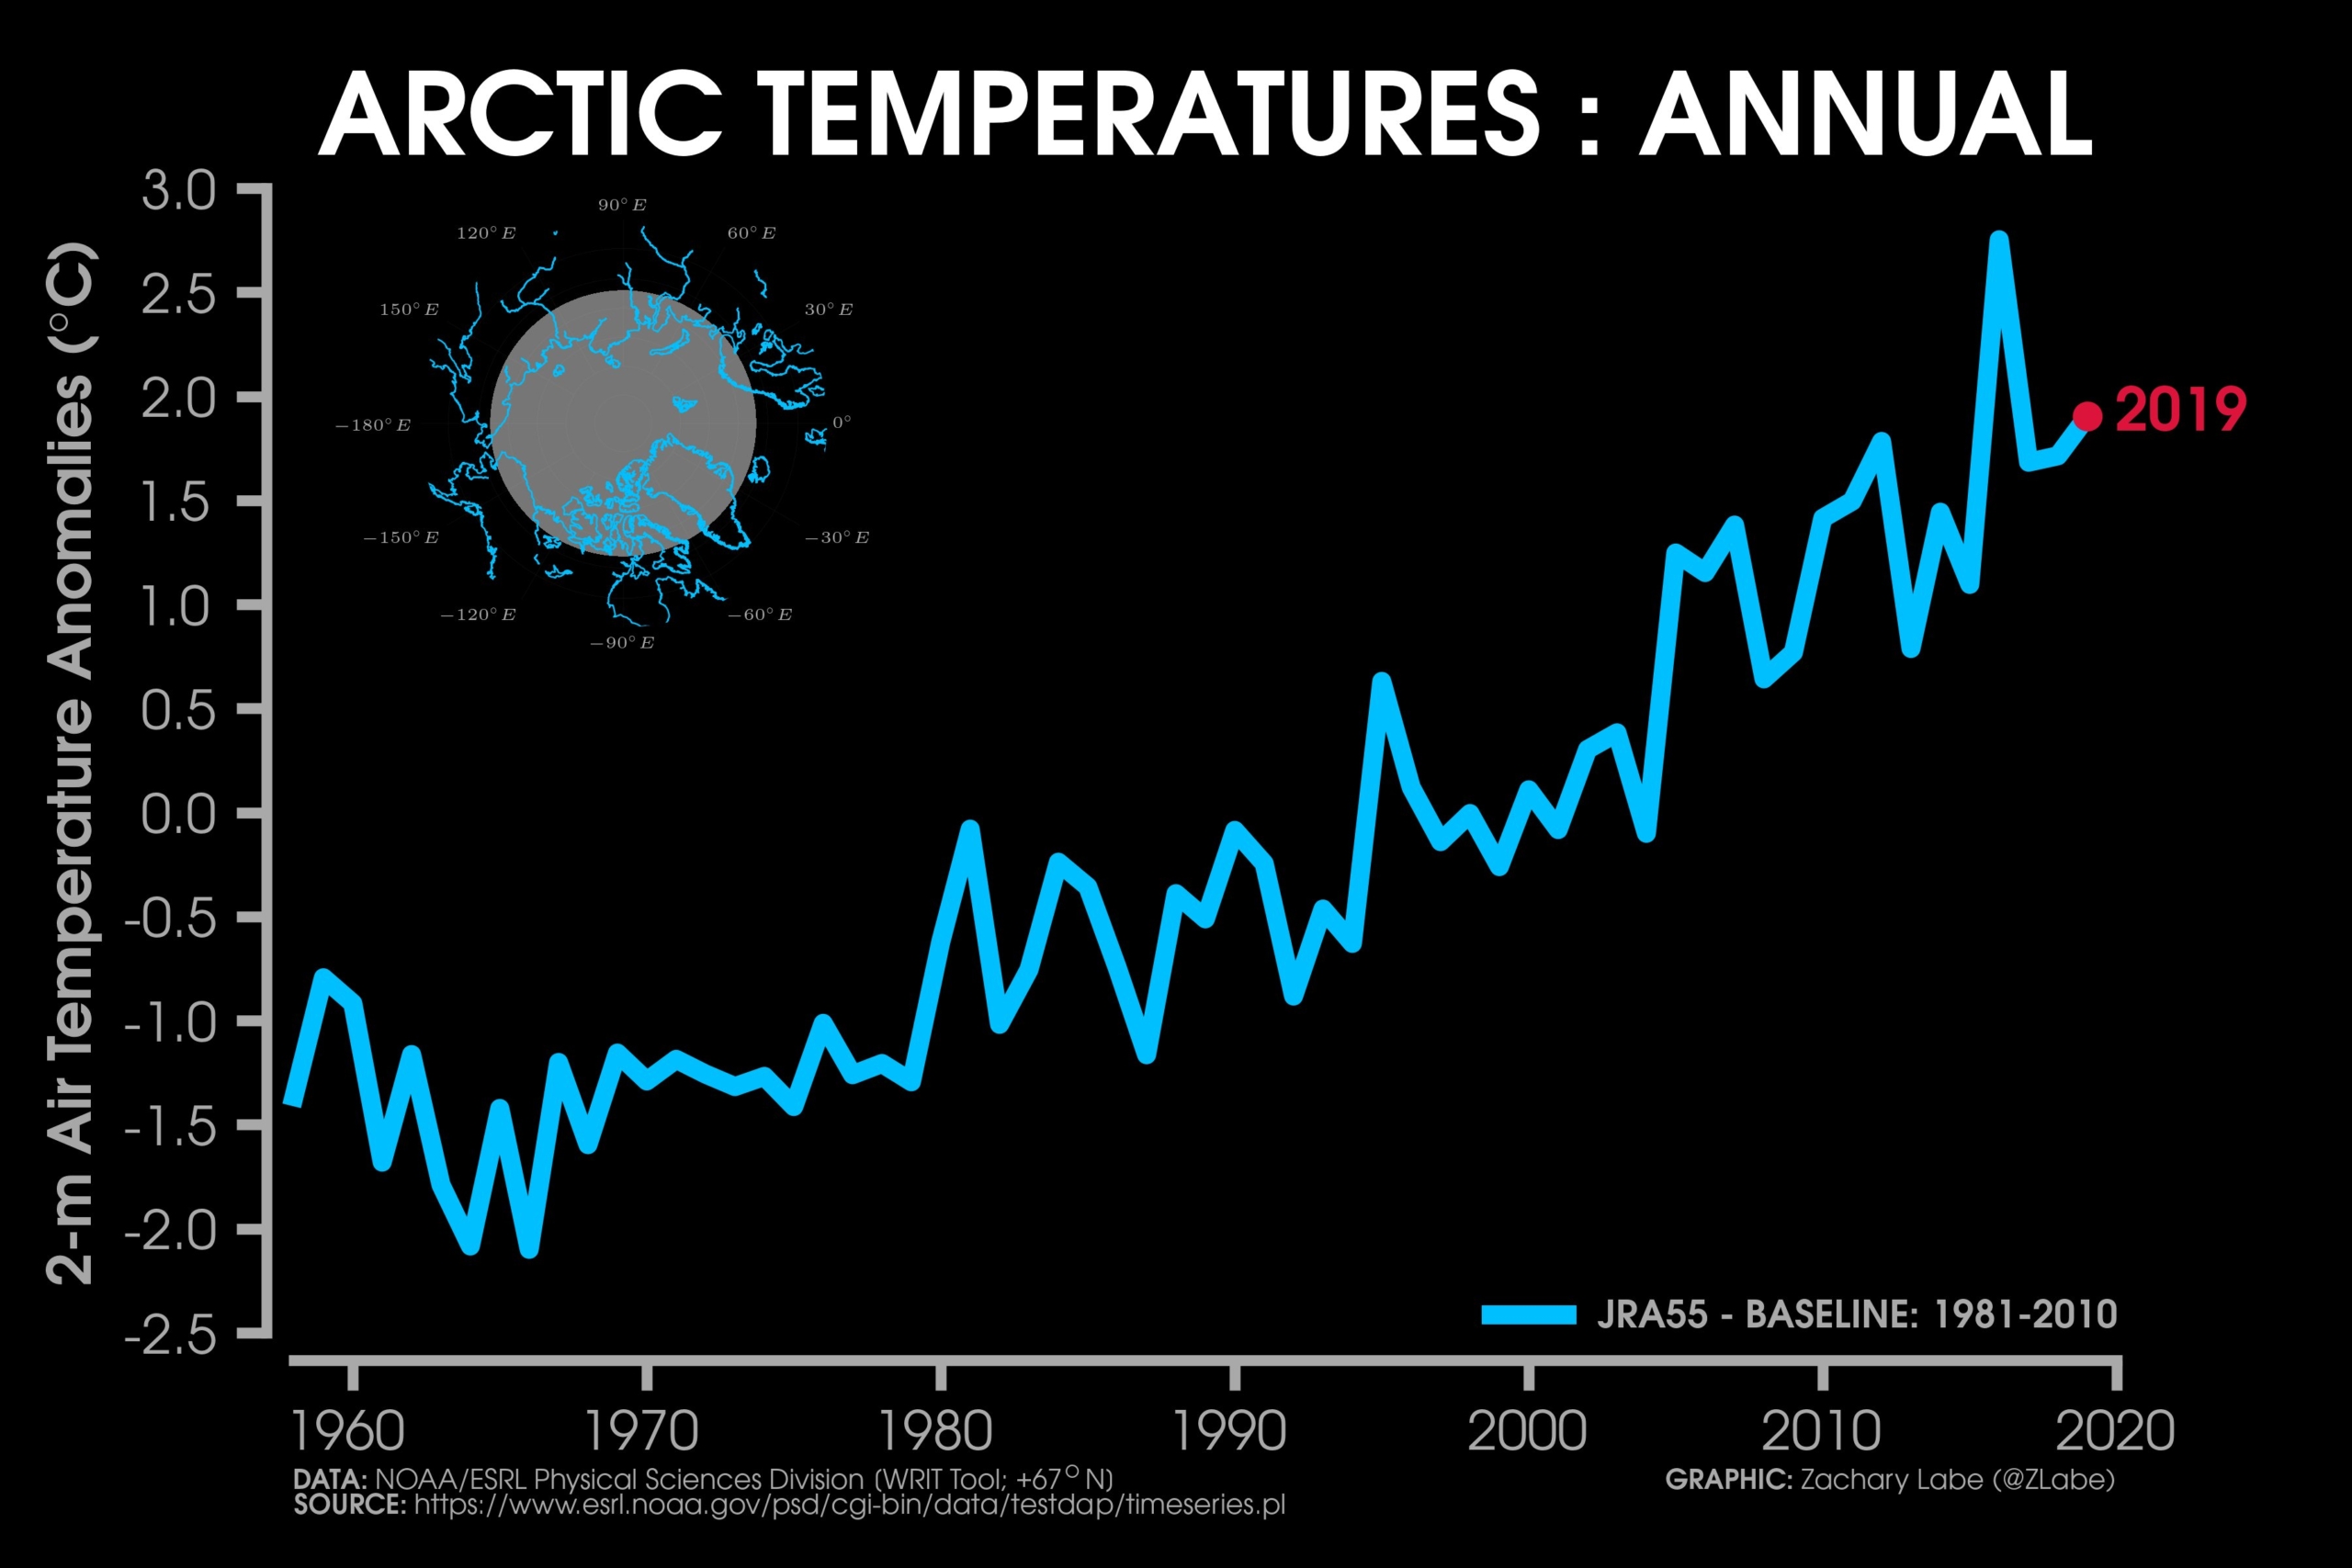 Arctic surface temperature anomaly, 1958-2019, relative to the 1981-2010 baseline. Data: NOAA/ESRL Physical Science Division (WRIT Tool: +67°N). Graphic: Zachary Labe